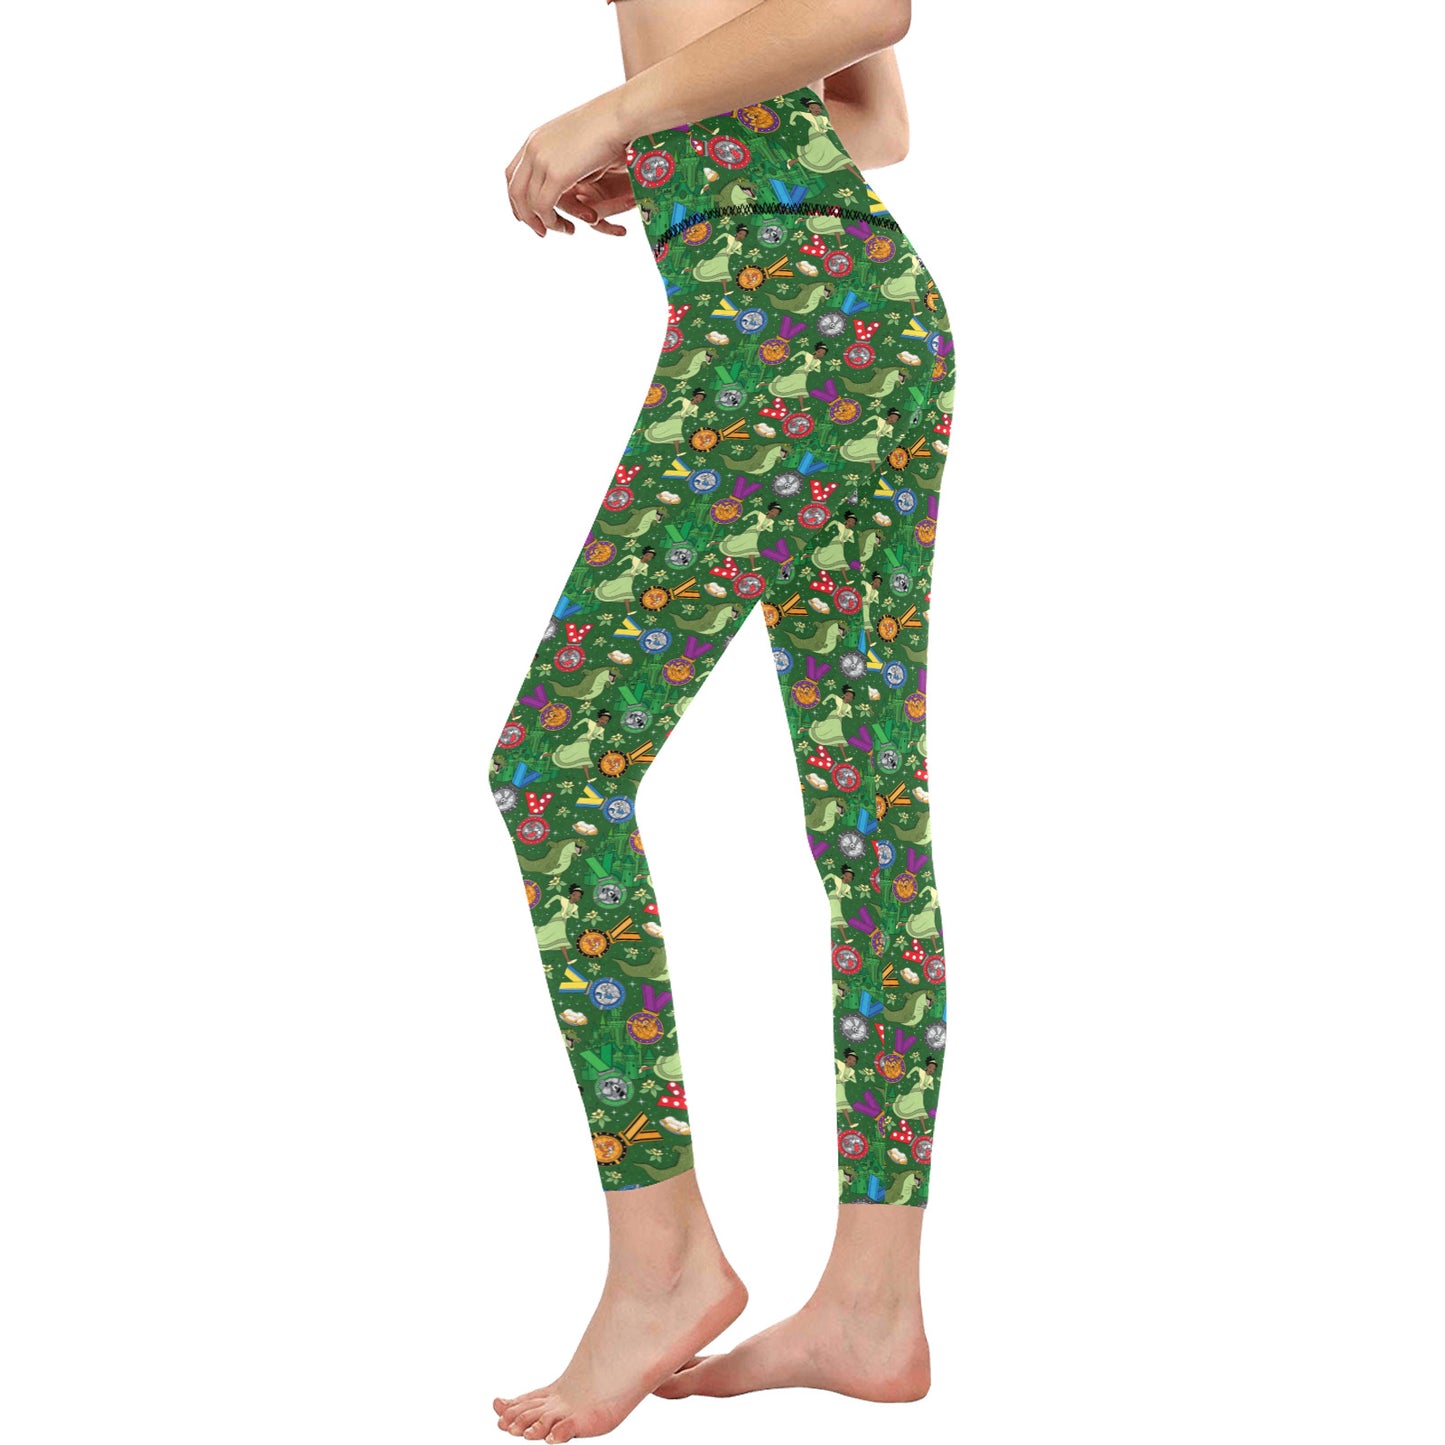 Tiana Wine And Dine Race Women's Athletic Leggings